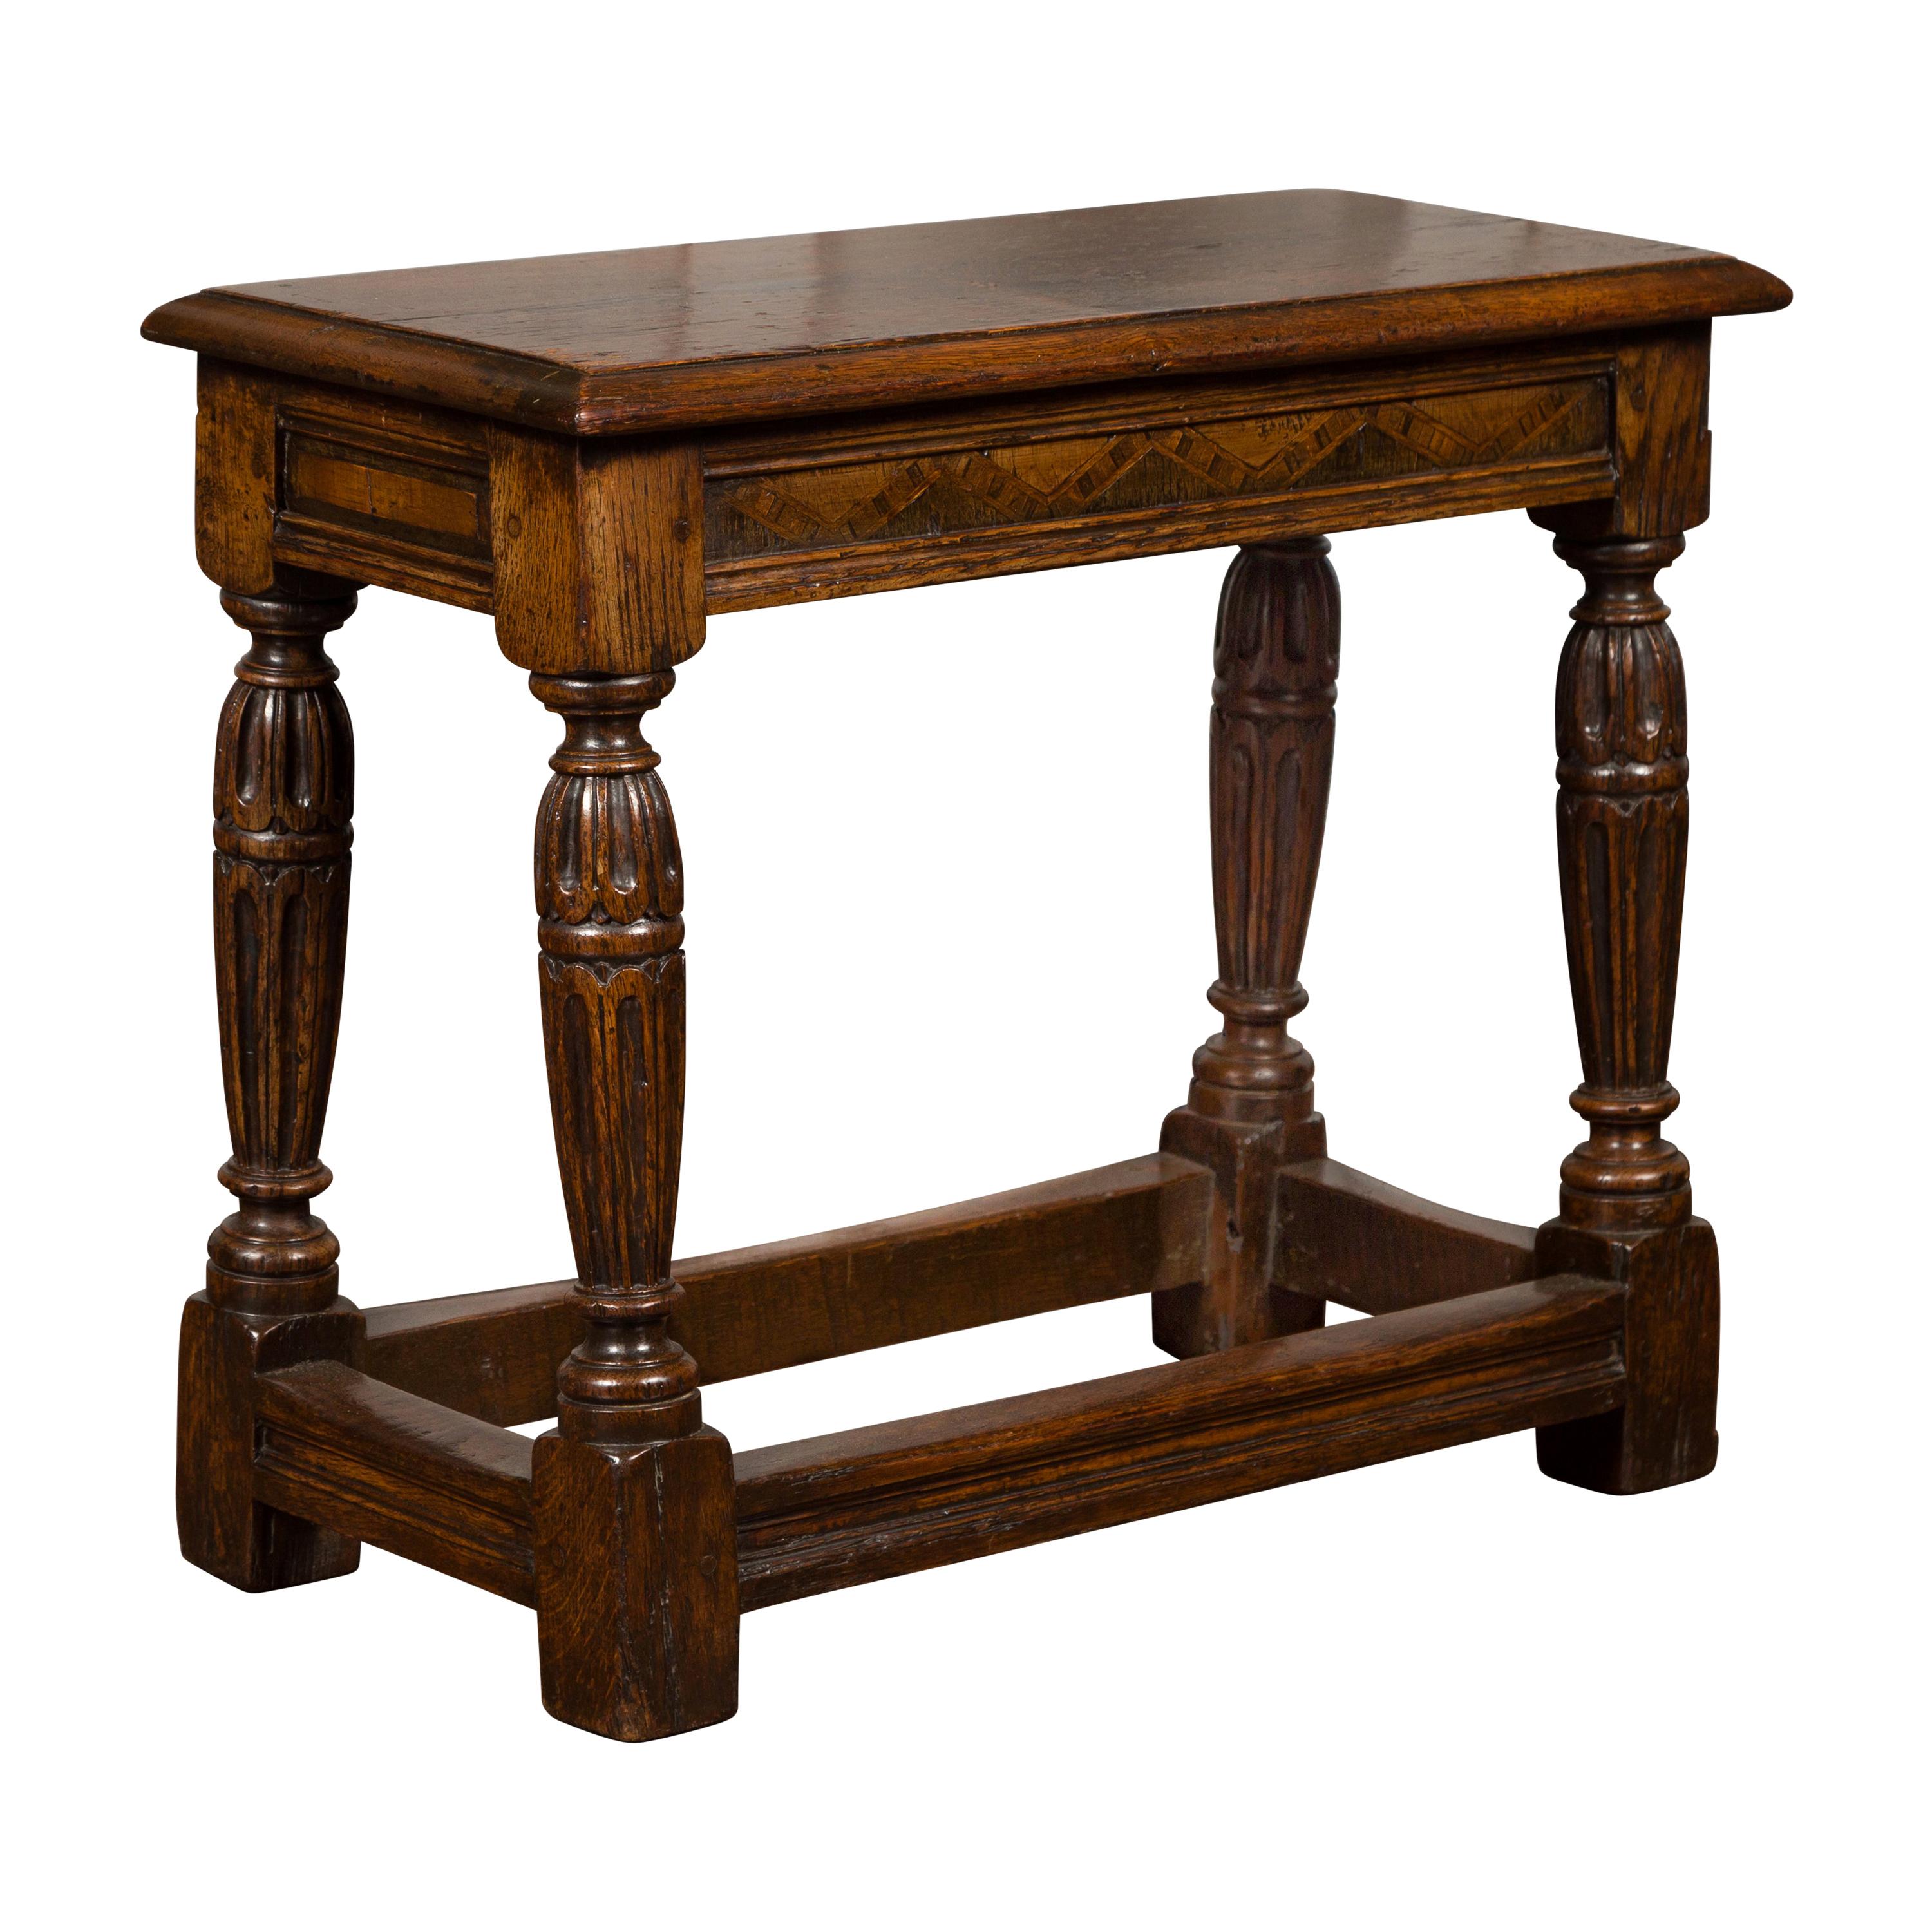 English 1880s Oak Joint Stool with Inlaid Apron, Carved Legs and Side Stretchers